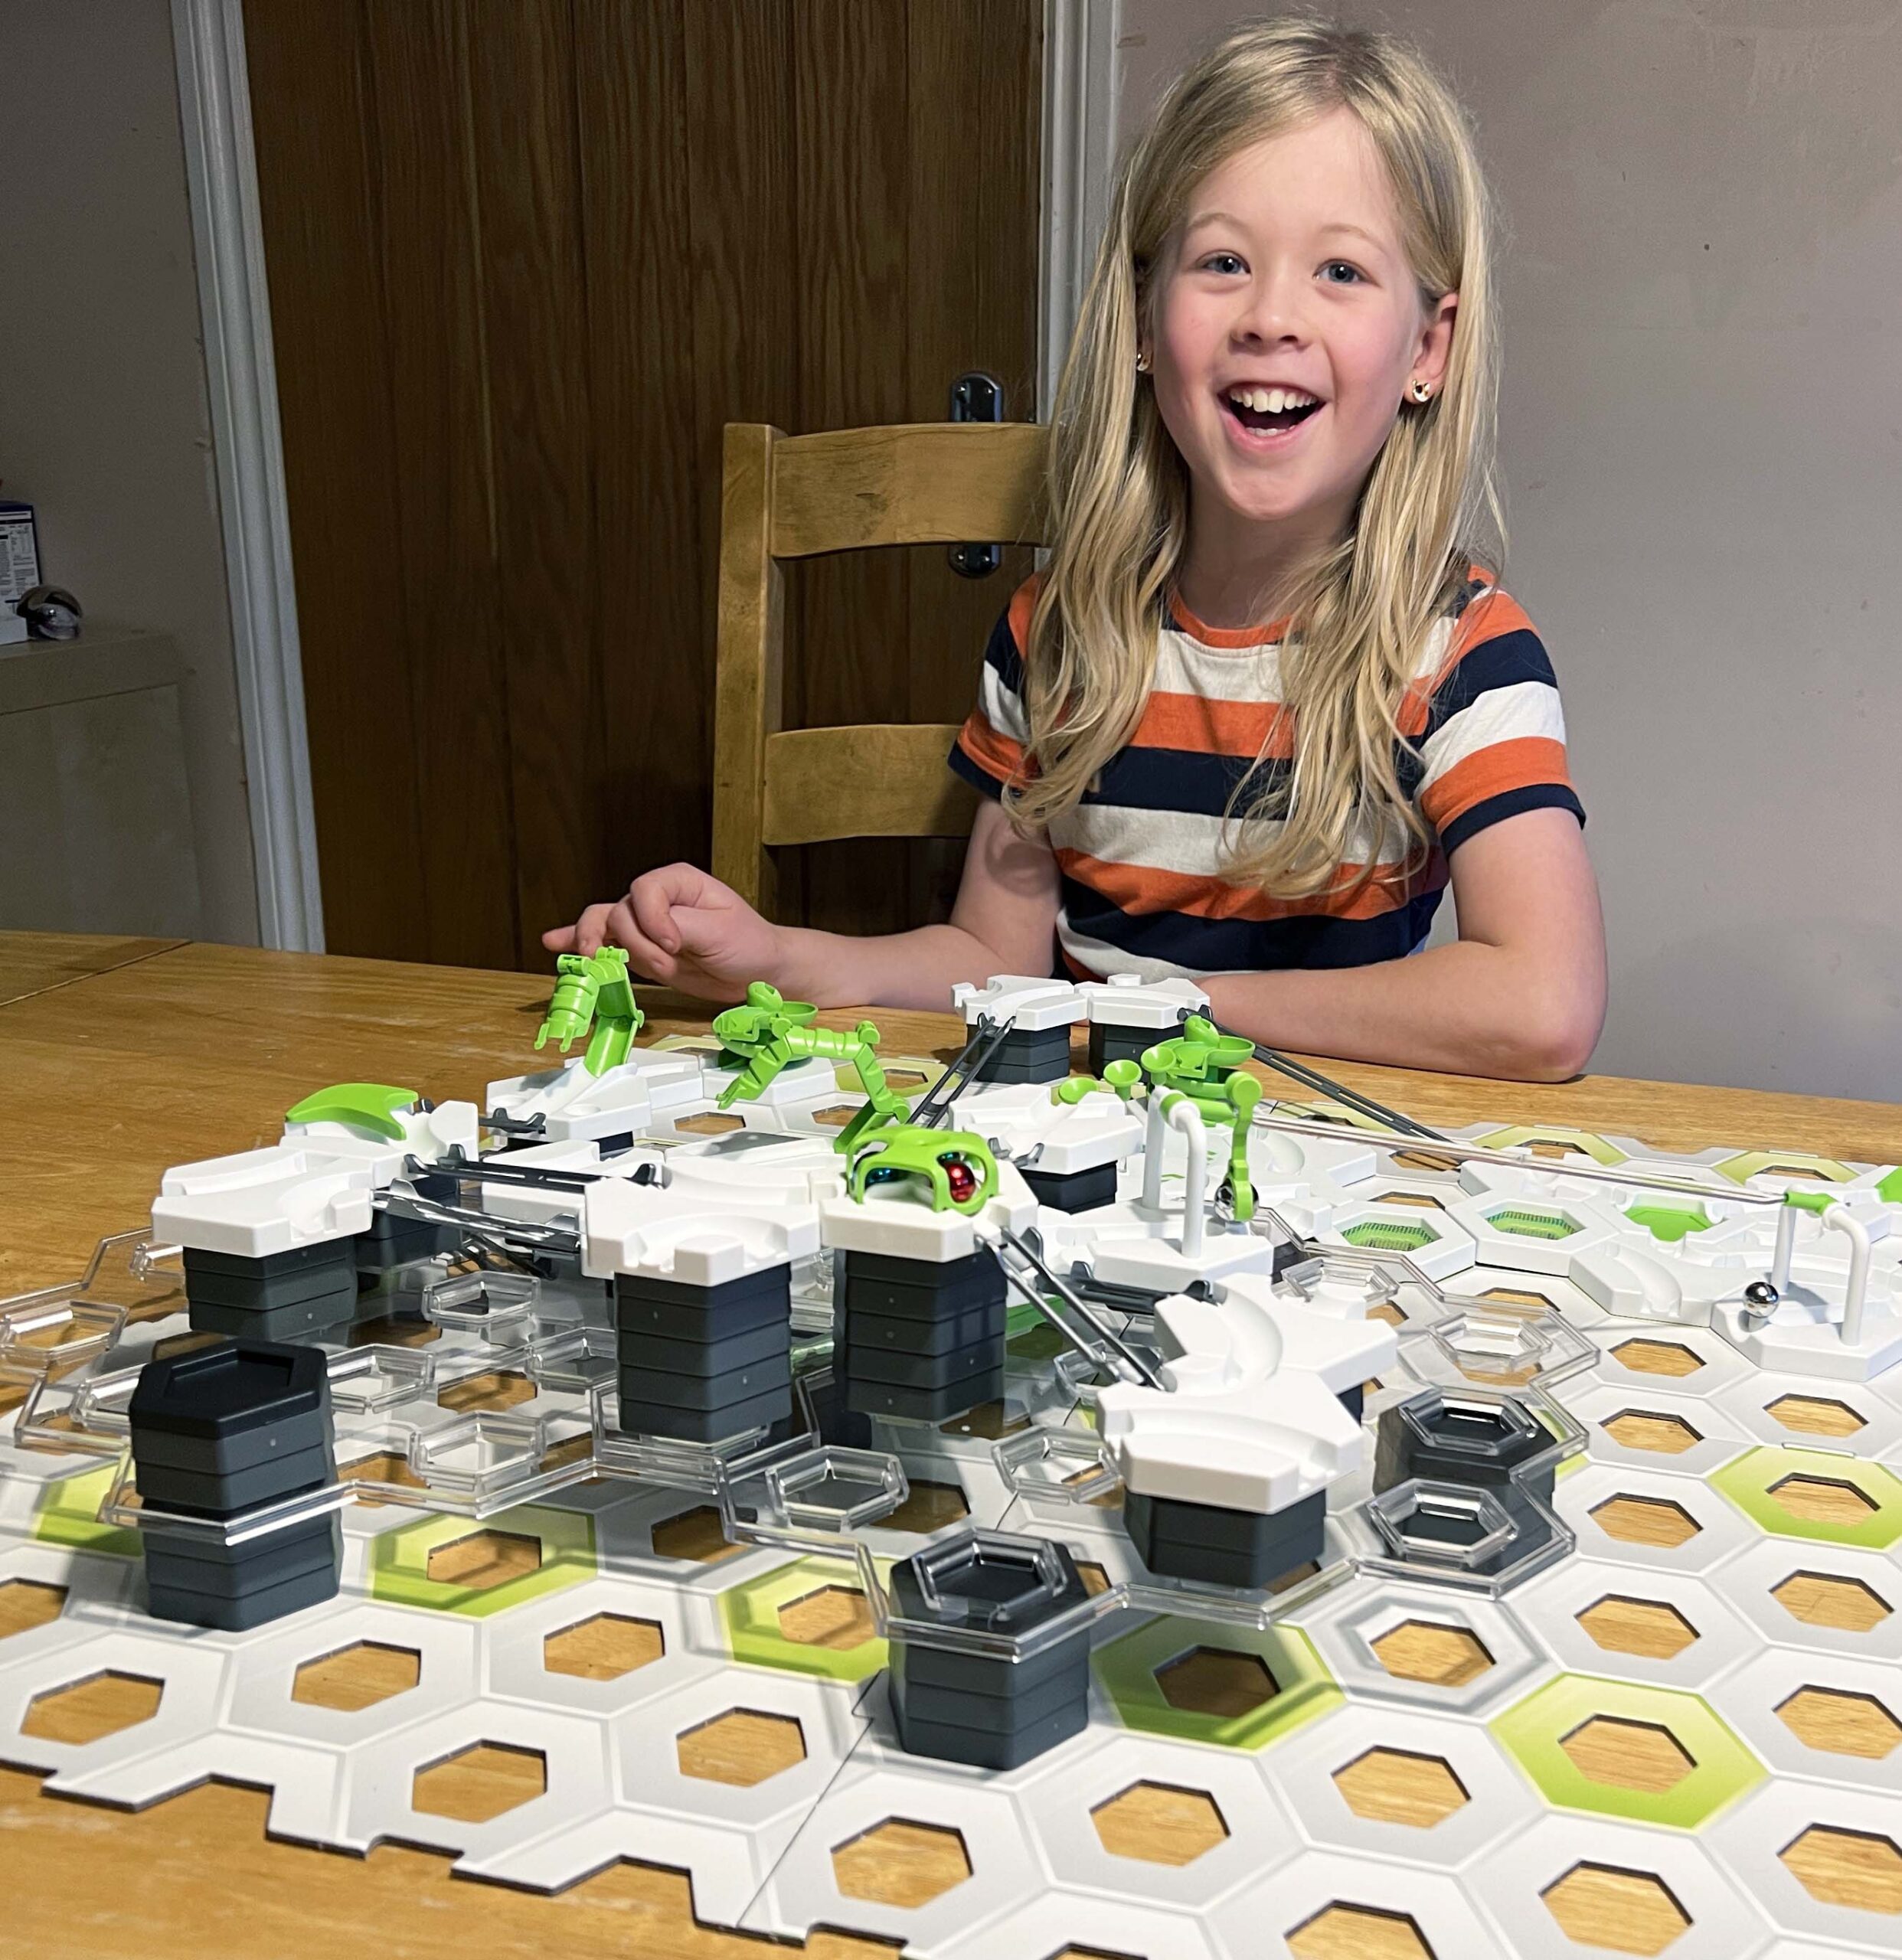 Gravitrax Obstacle Course Review - A Toy Great for STEM Skills